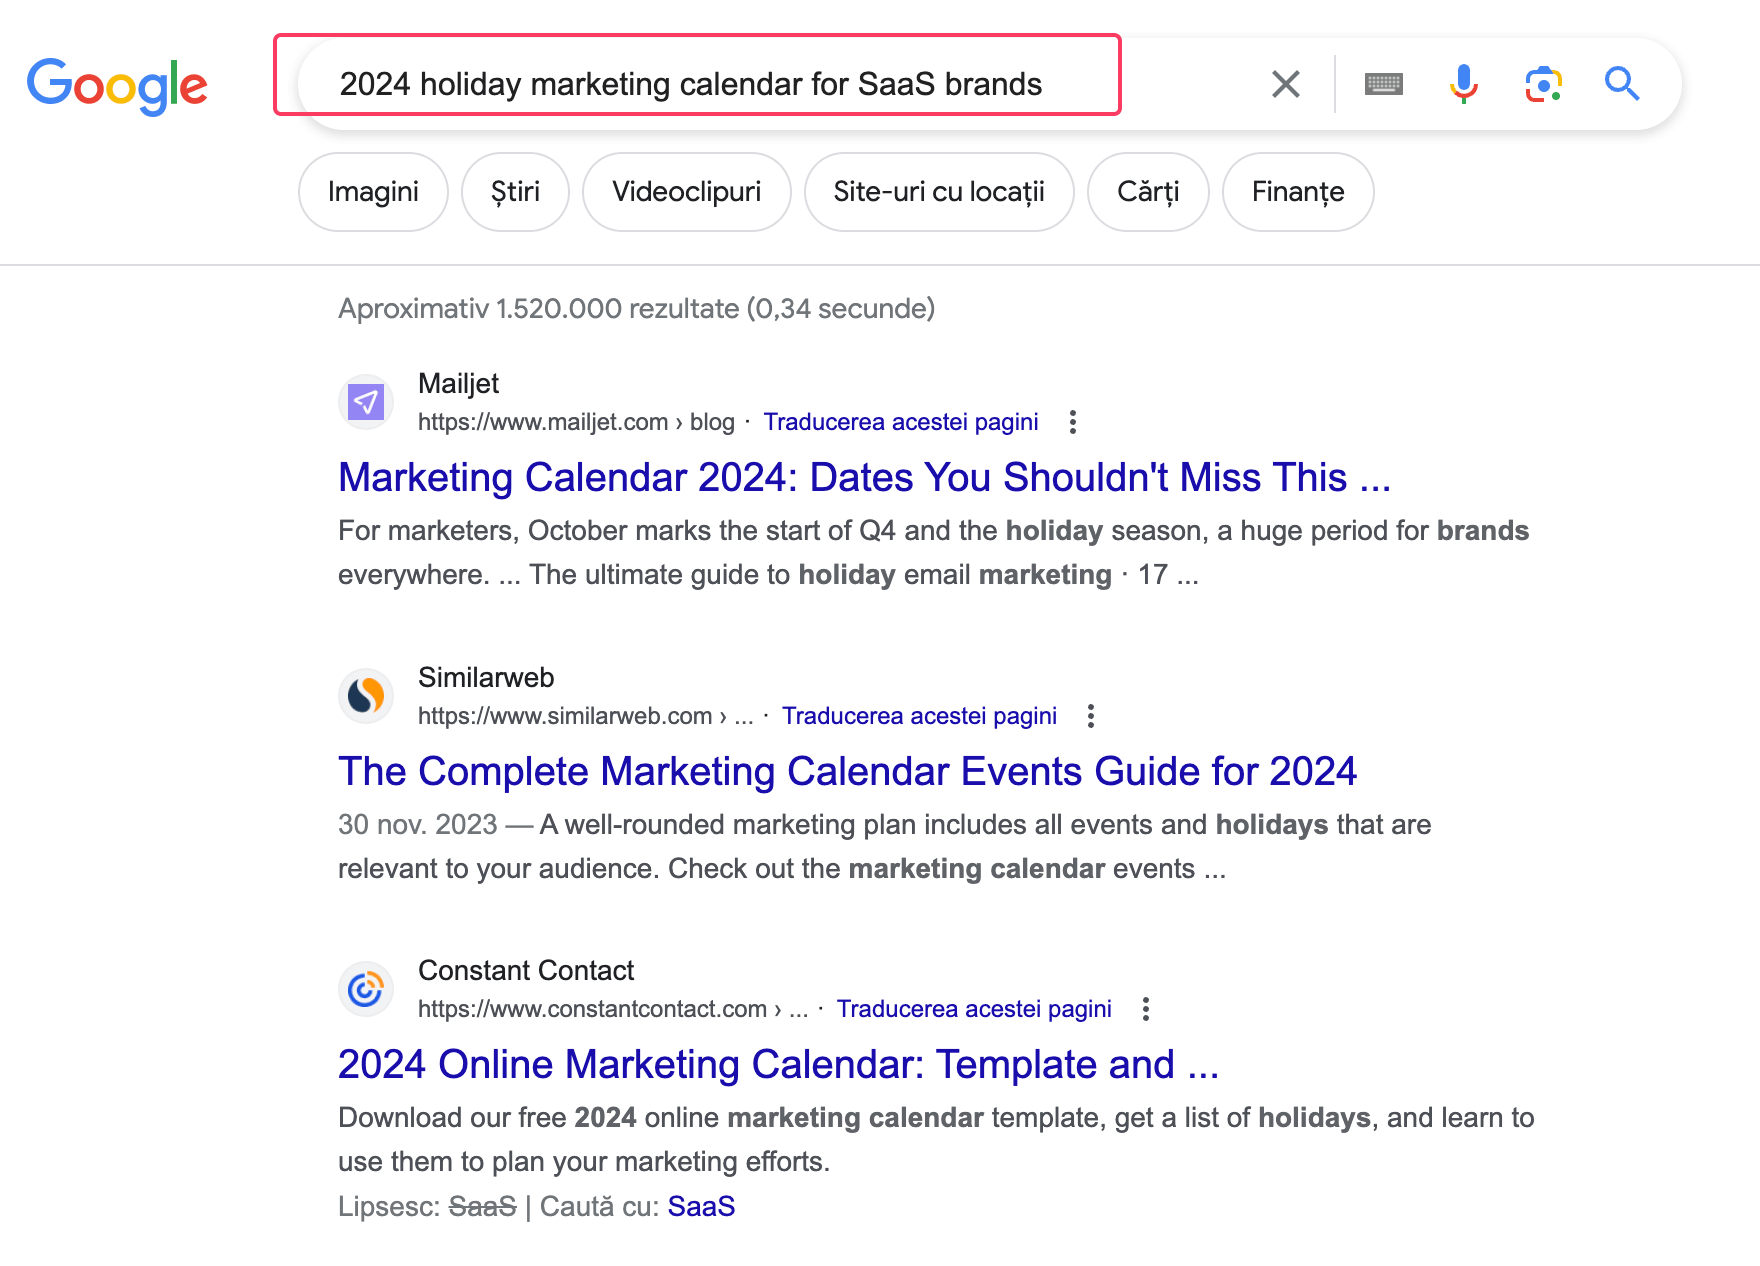 Searching for '2024 holiday marketing calendar for SaaS brands' in Google search box